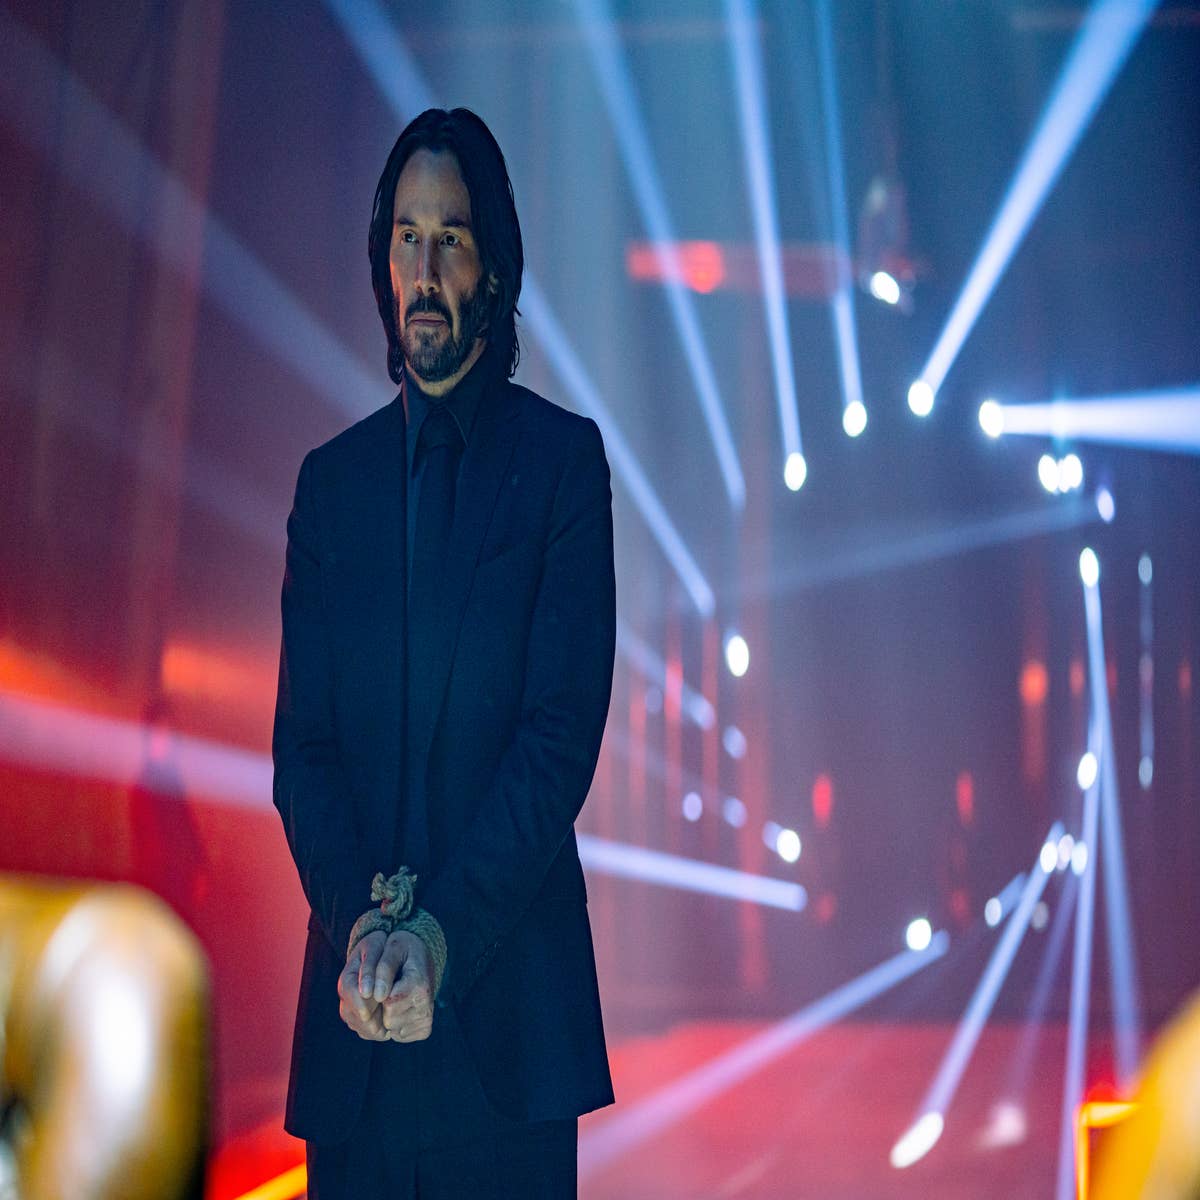 John Wick 4: Release Date, Cast, Plot, Trailer & Everything You Need to  Know